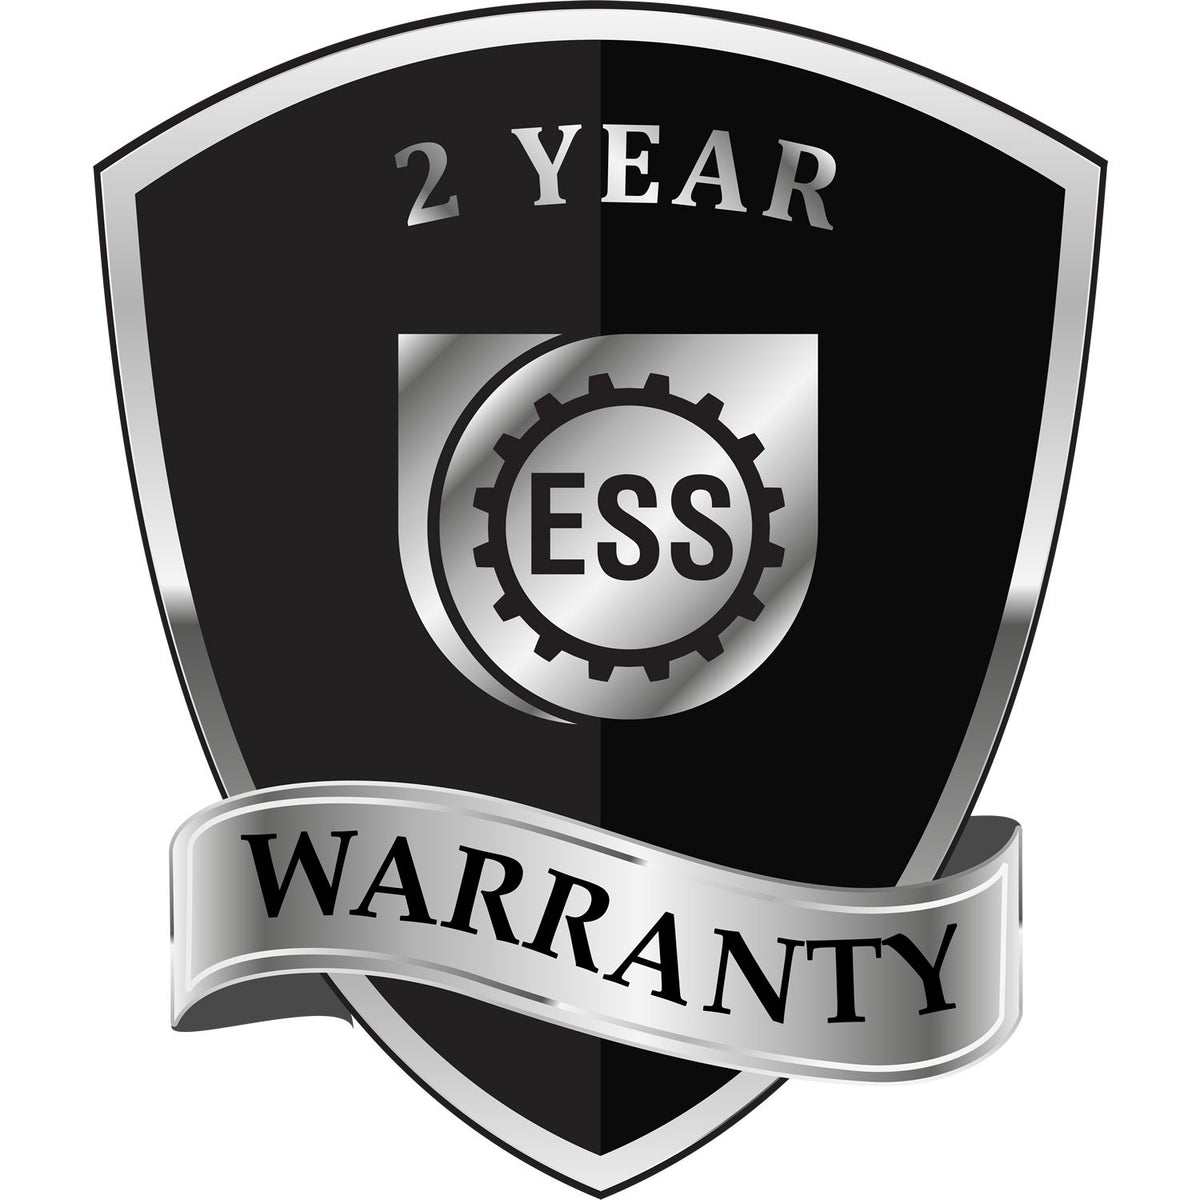 A black and silver badge or emblem showing warranty information for the Gift Kansas Architect Seal